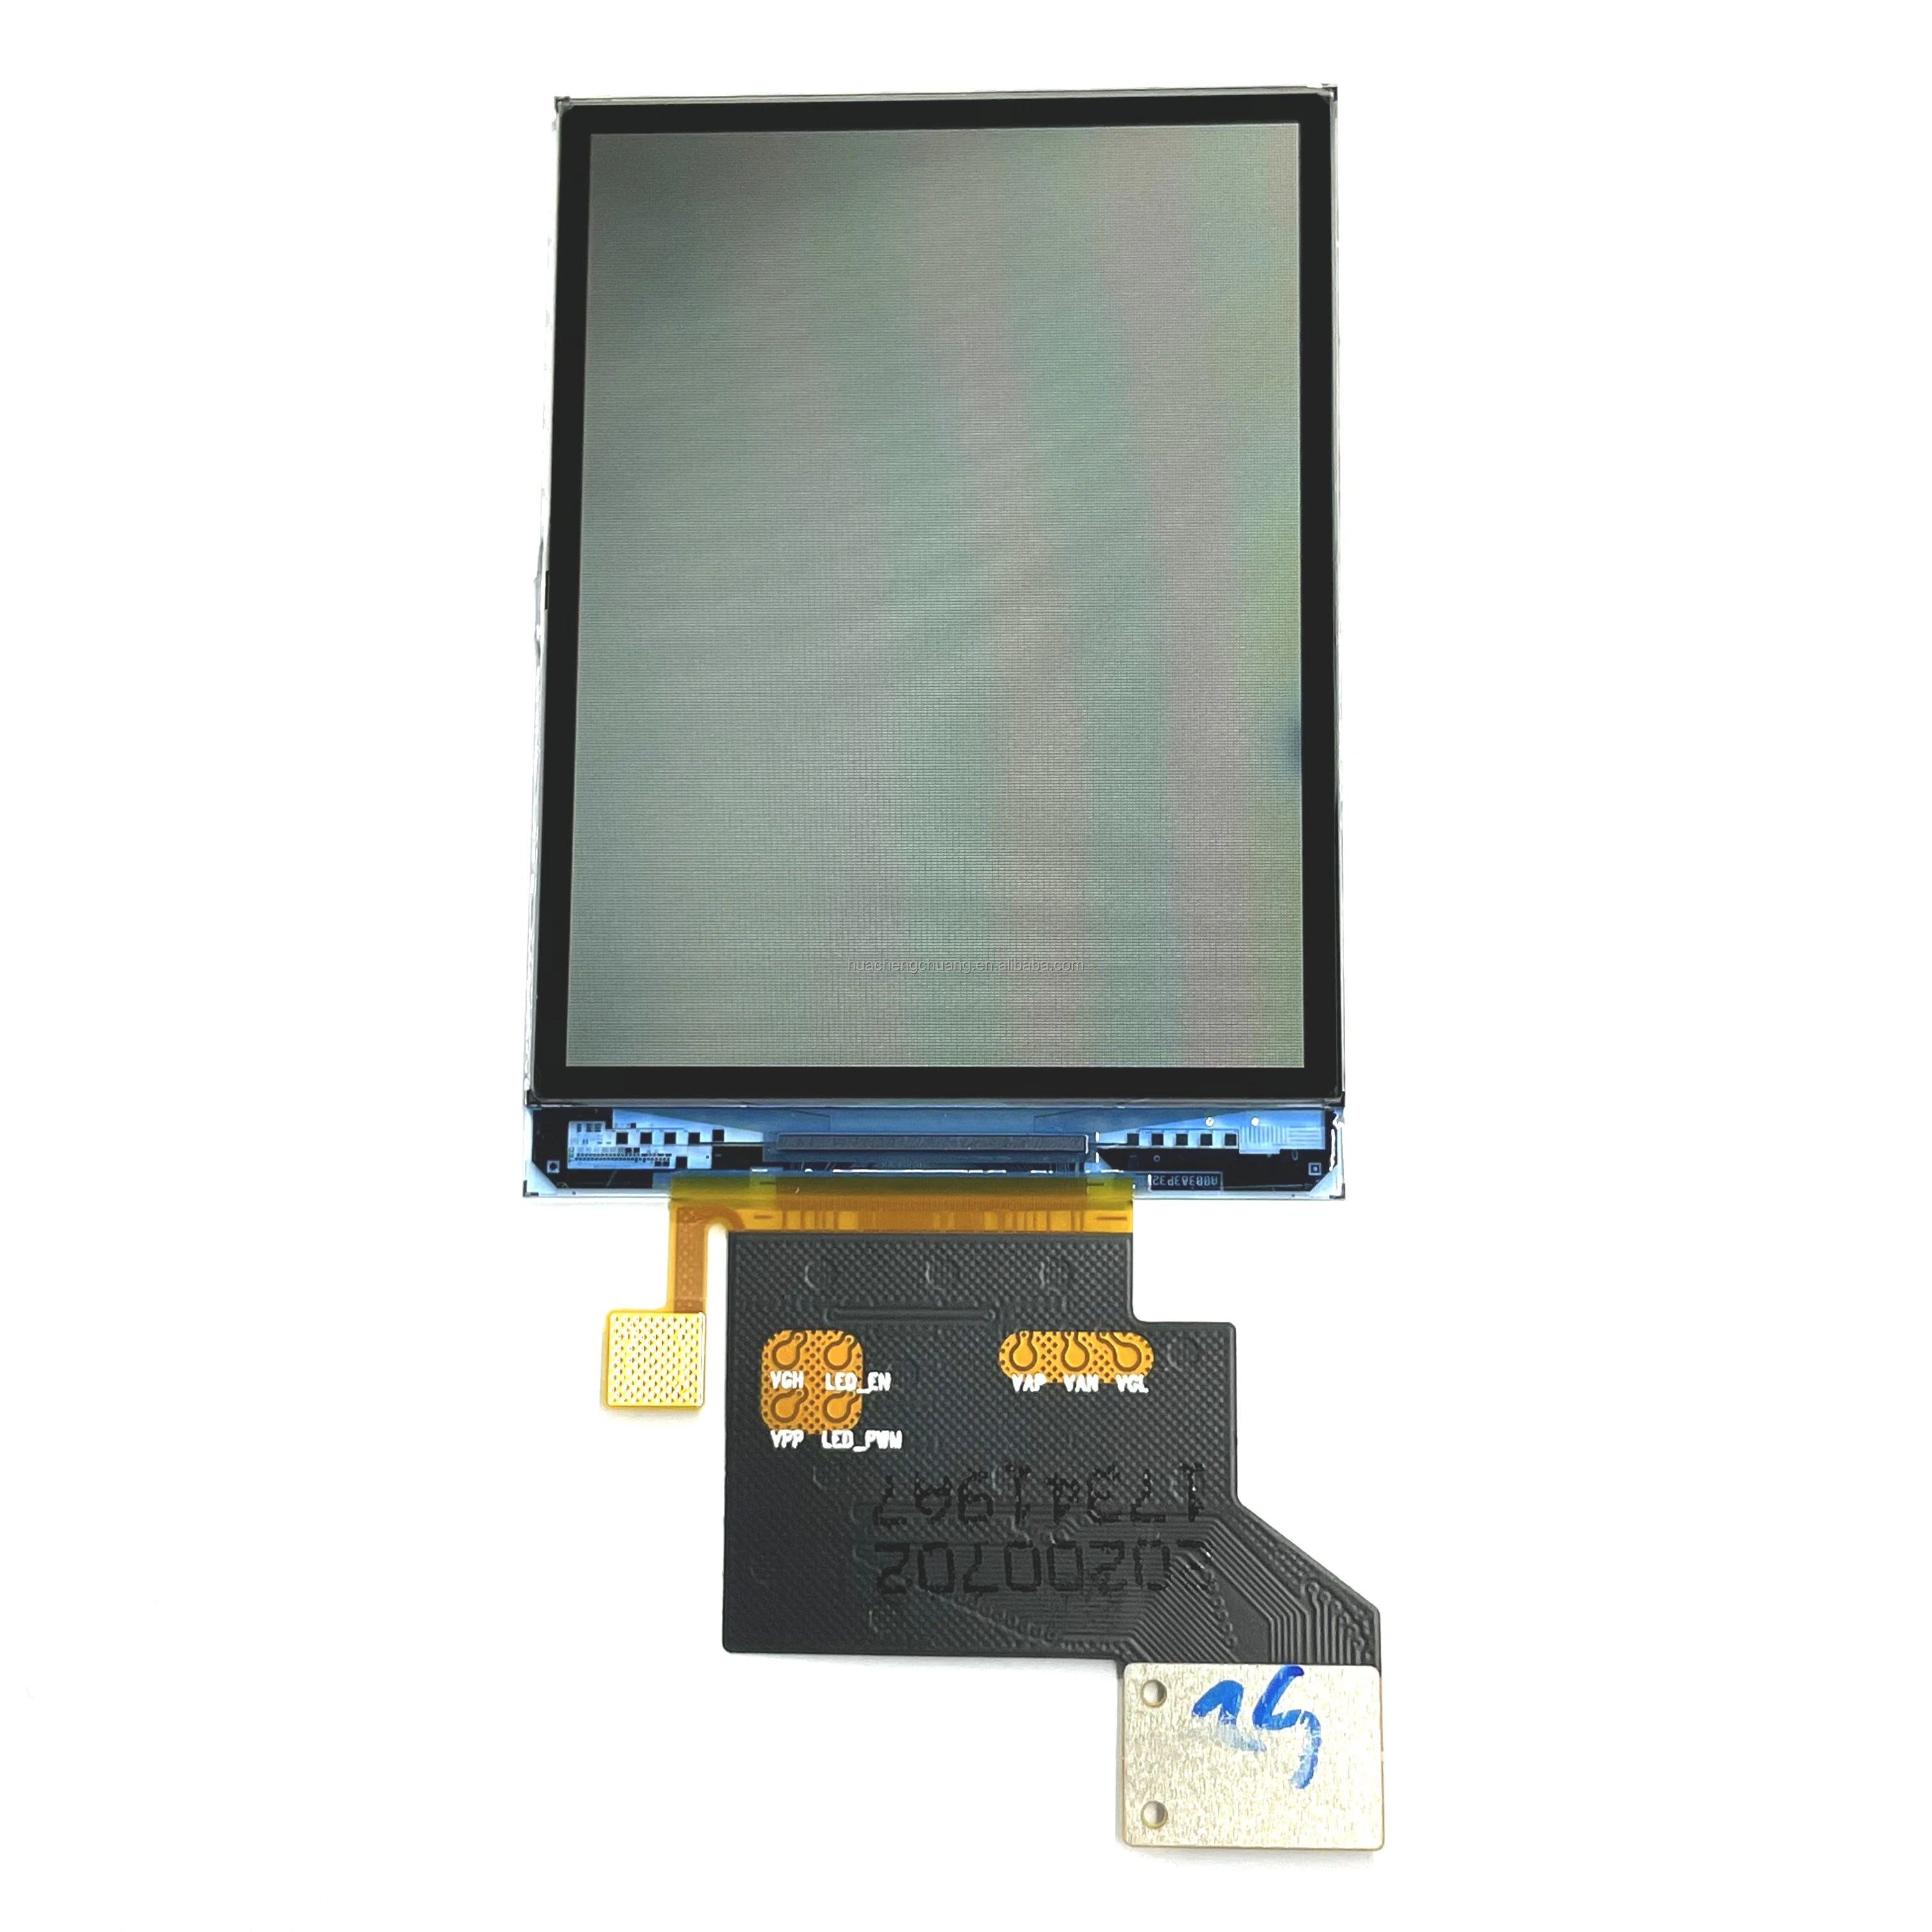 Model TFT7K0233FPC  2.56 inch TFT LCD DISPLAY SCREEN MODULE With backlight